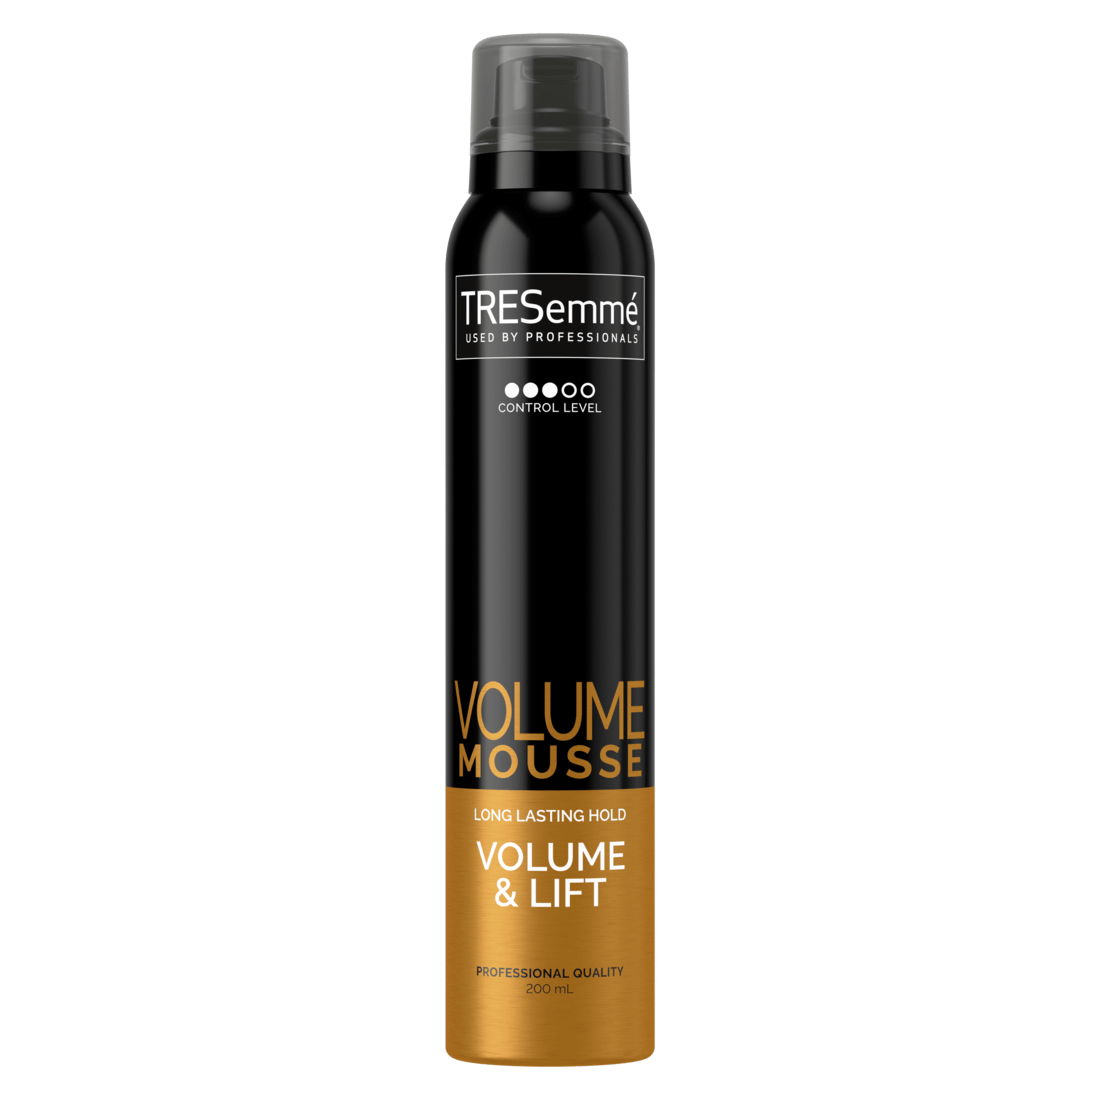 A 200ml can of TRESemmé Volume & Lift Mousse front of pack image